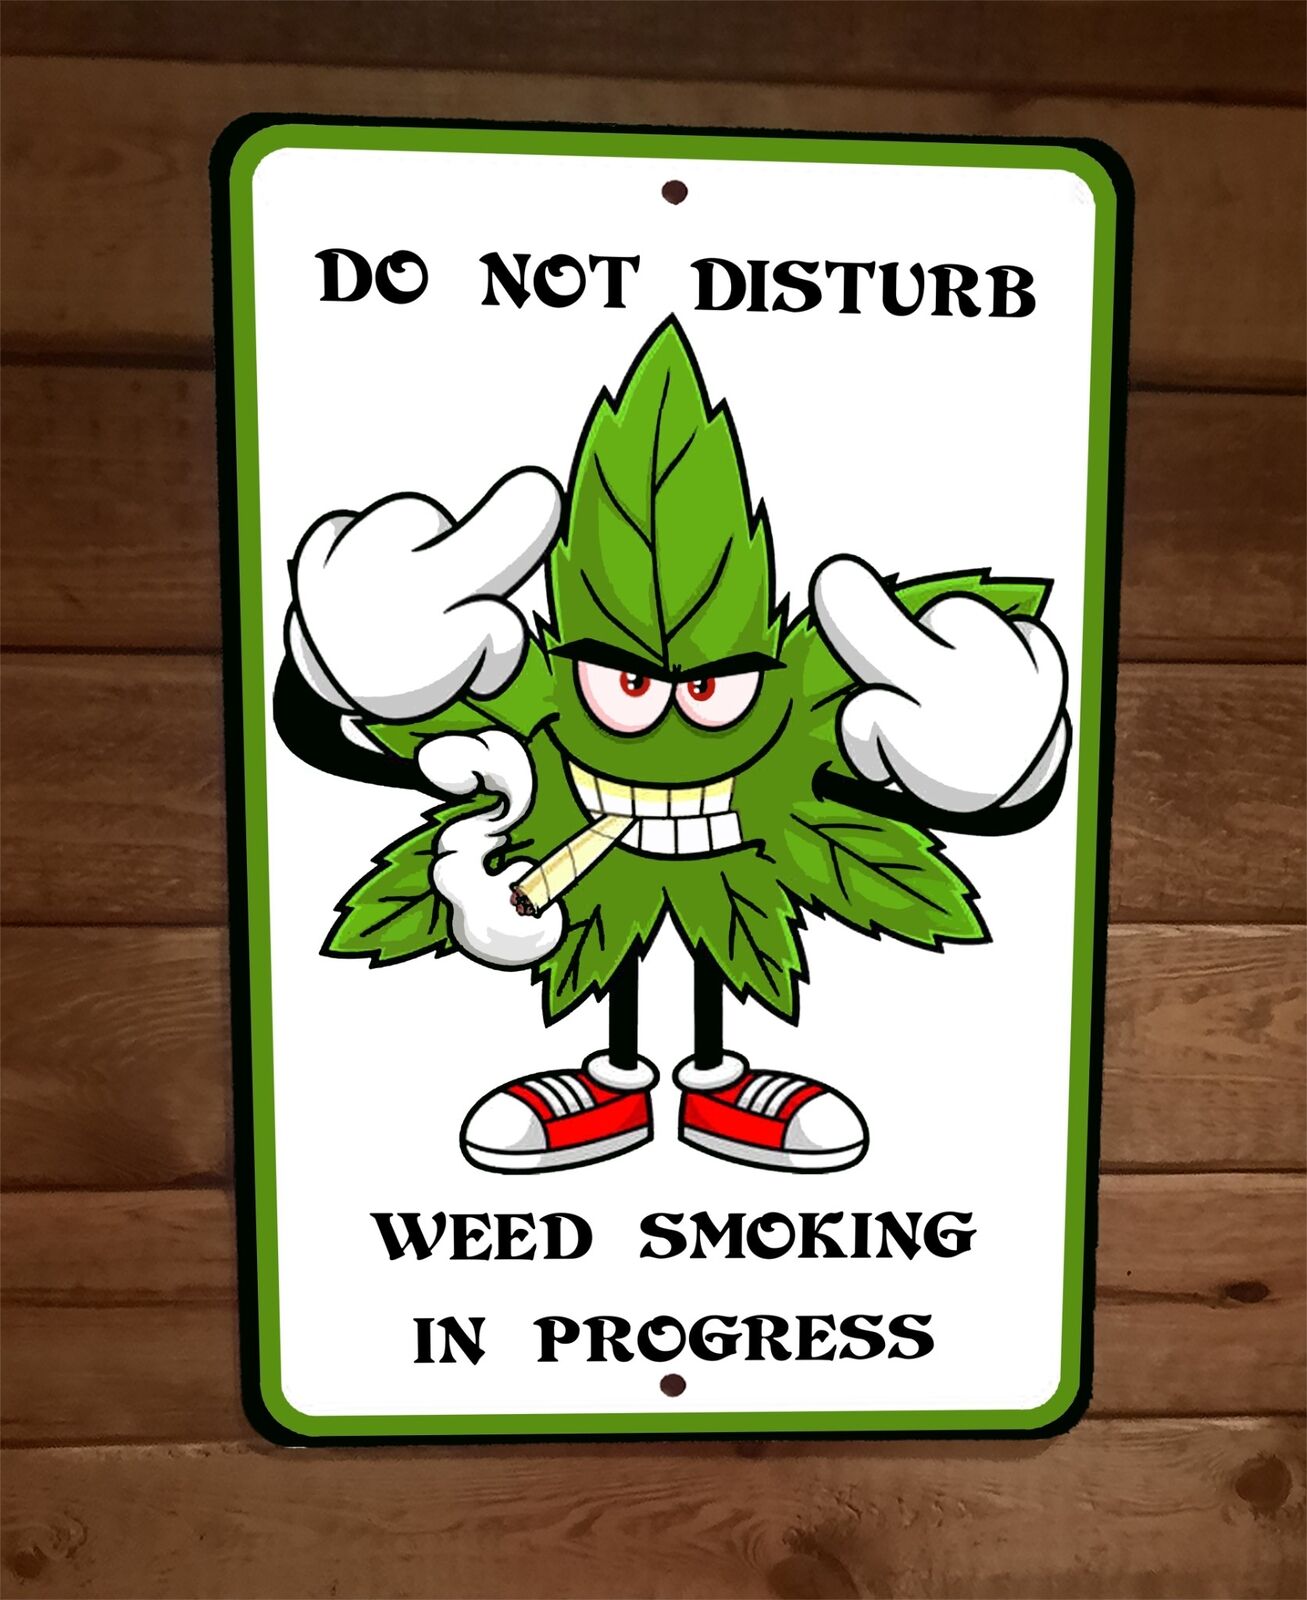 Do Not Disturb Weed Smoking in Progress 8x12 Metal Wall Sign 420 Mary Jane